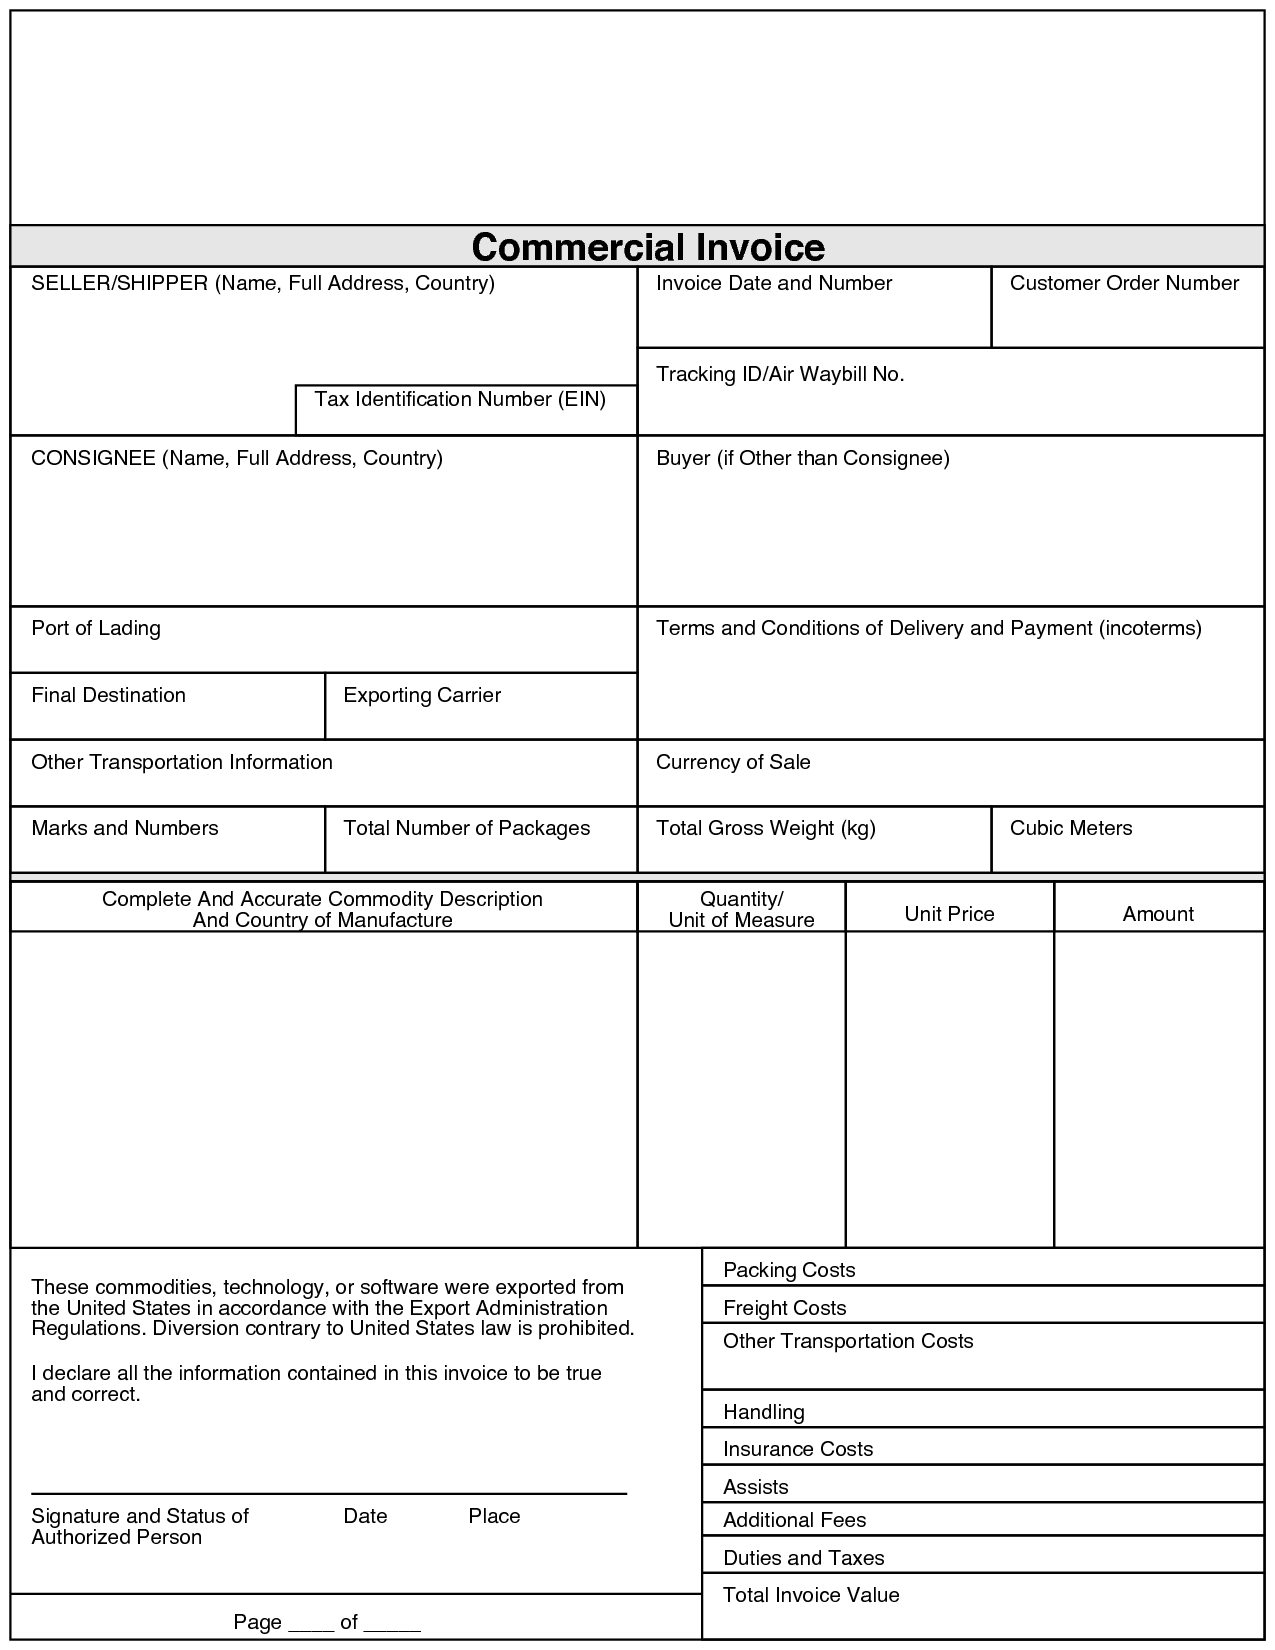 usmca commercial invoice template